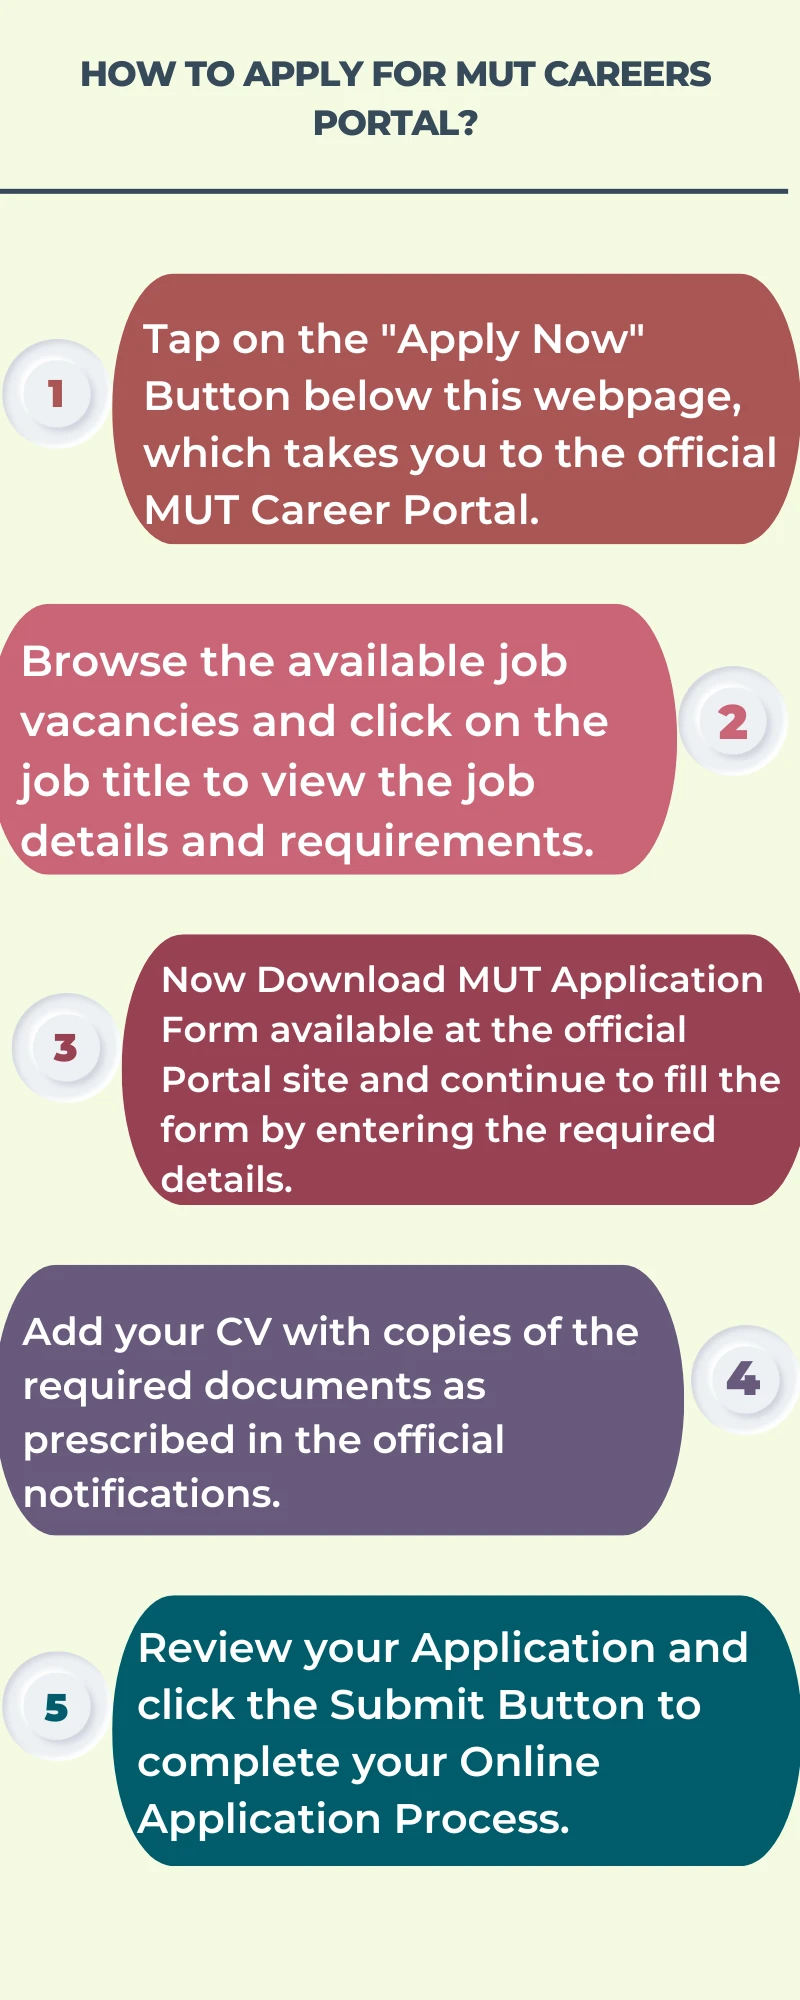 How To Apply for MUT Careers Portal?